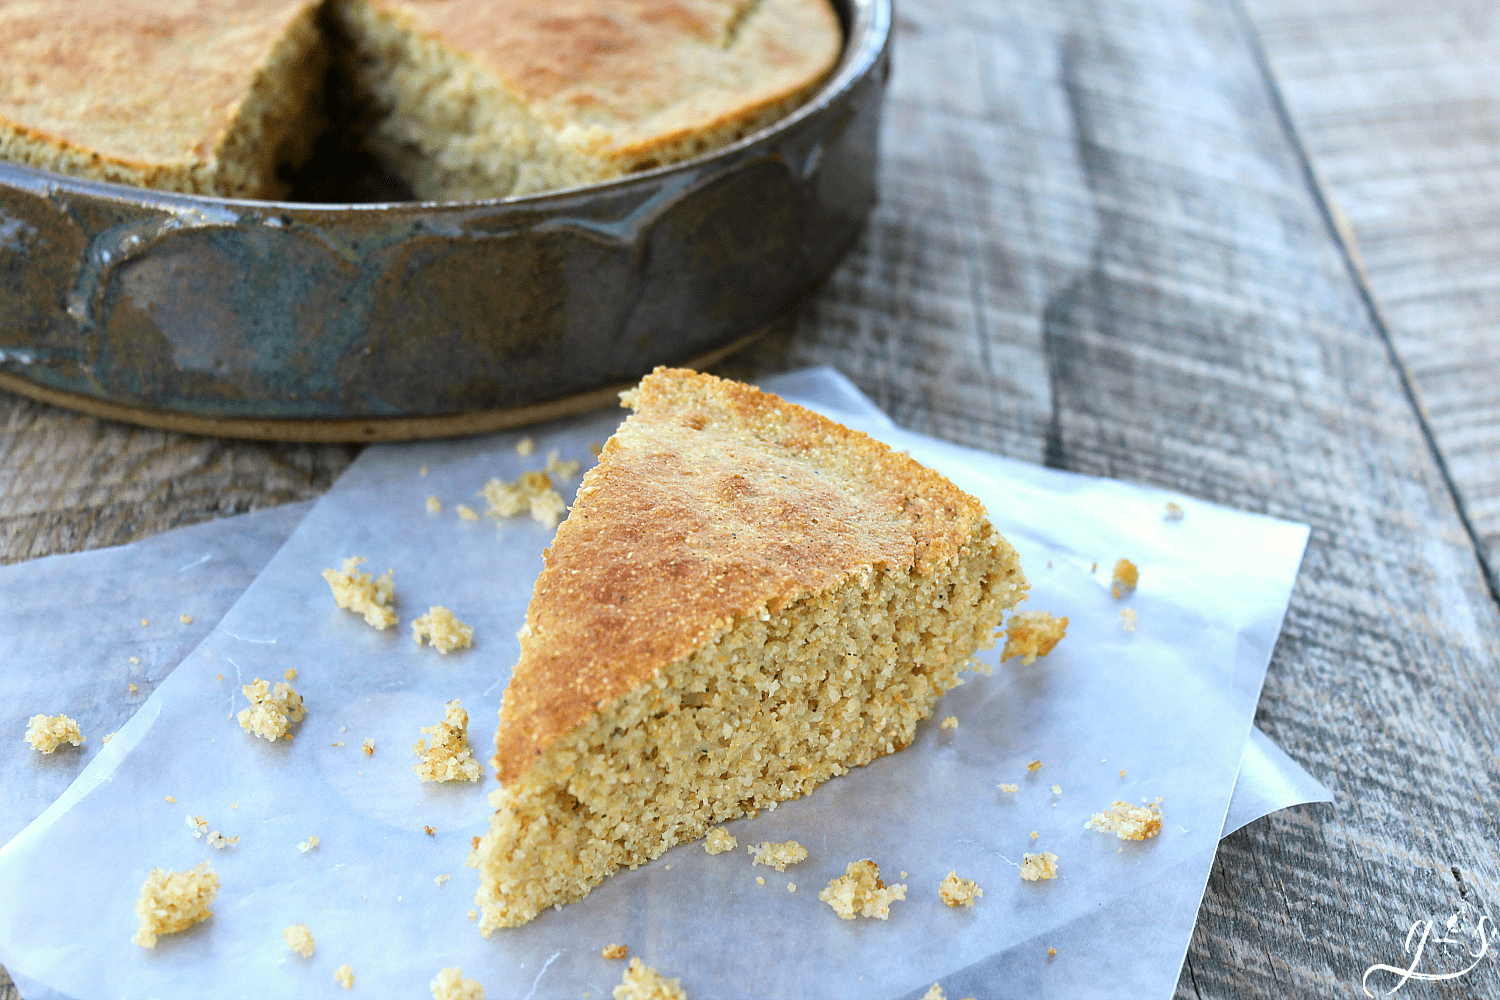 The BEST Clean Eating Maple Cornbread | Who says comfort food can't be healthy? This sweet yet savory and easy recipe is both gluten free and delicious. A homemade, low carb, and 21 Day Fix approved side dish for chili or soup. Oatmeal replaces white flour, plain Greek yogurt in place of oil, and maple syrup instead of white sugar. We have also tried it with whole wheat flour and it was amazing!